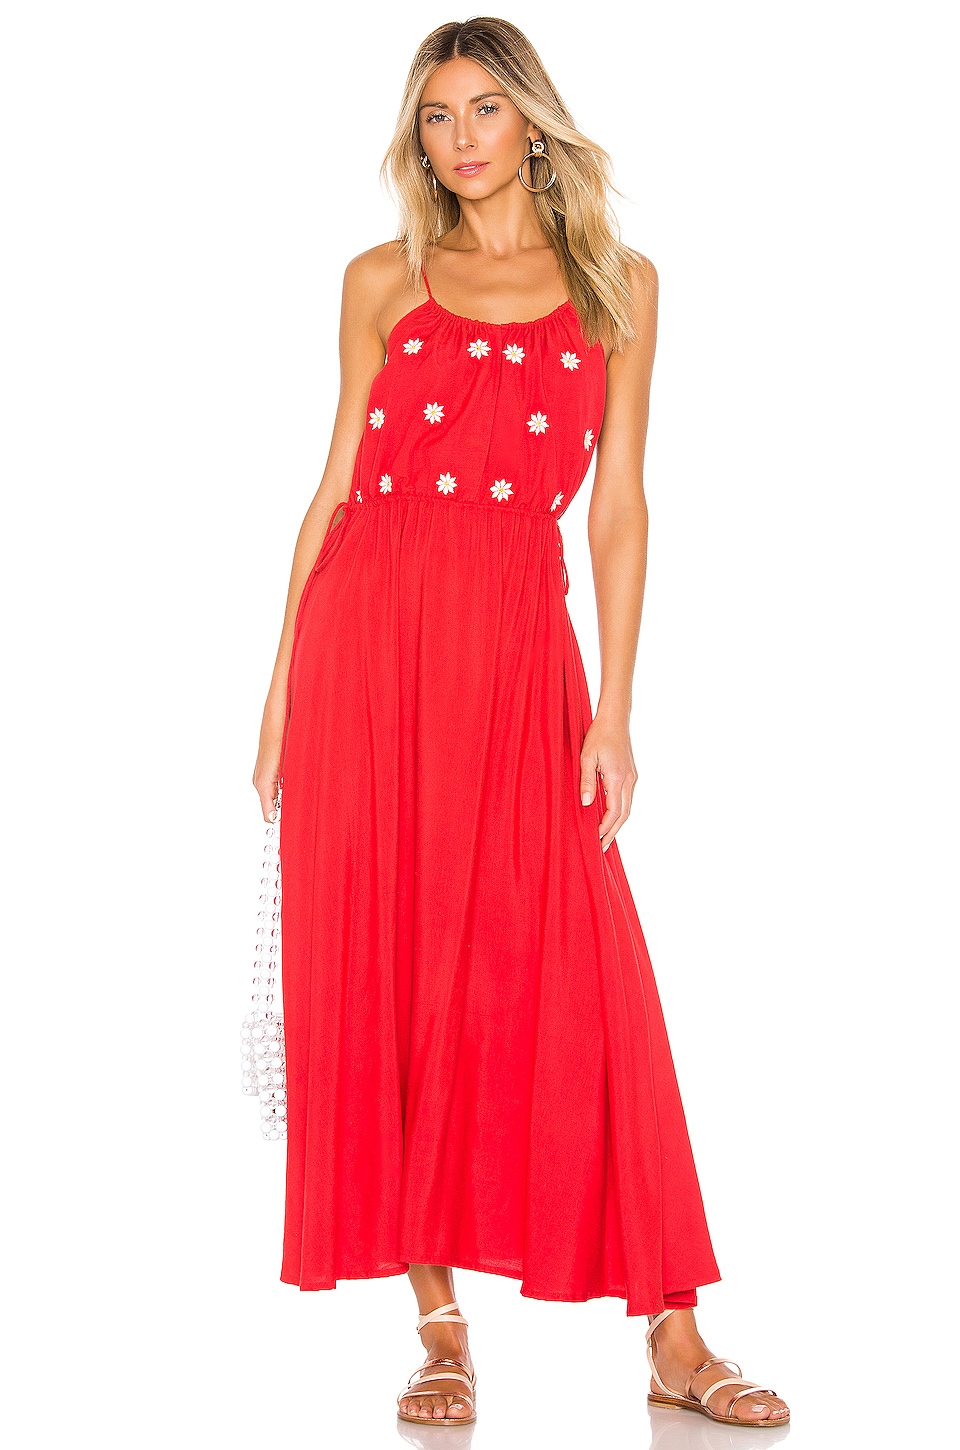 Sundress Robyn Dress in Red & Mini Daisies Embroideries | REVOLVE